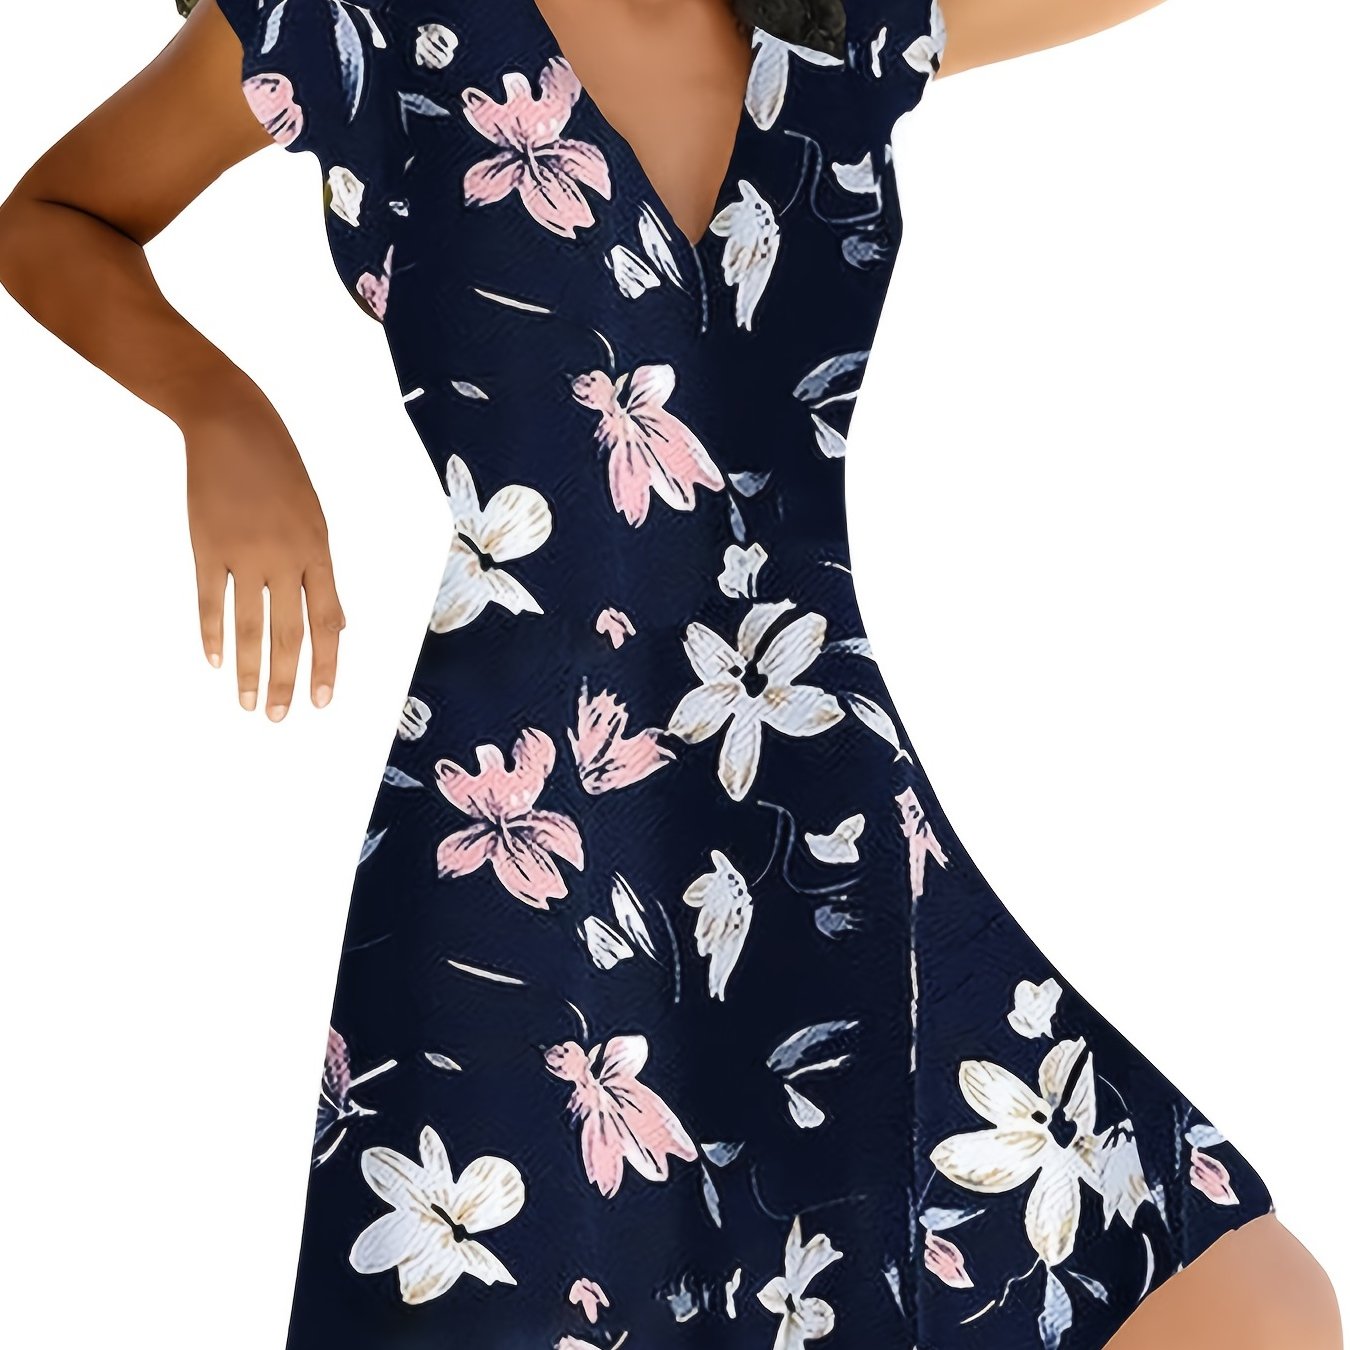 「binfenxie」Floral Print V Neck Slim Dress, Short Sleeve Casual Every Day Dress For Fall & Spring, Women's Clothing